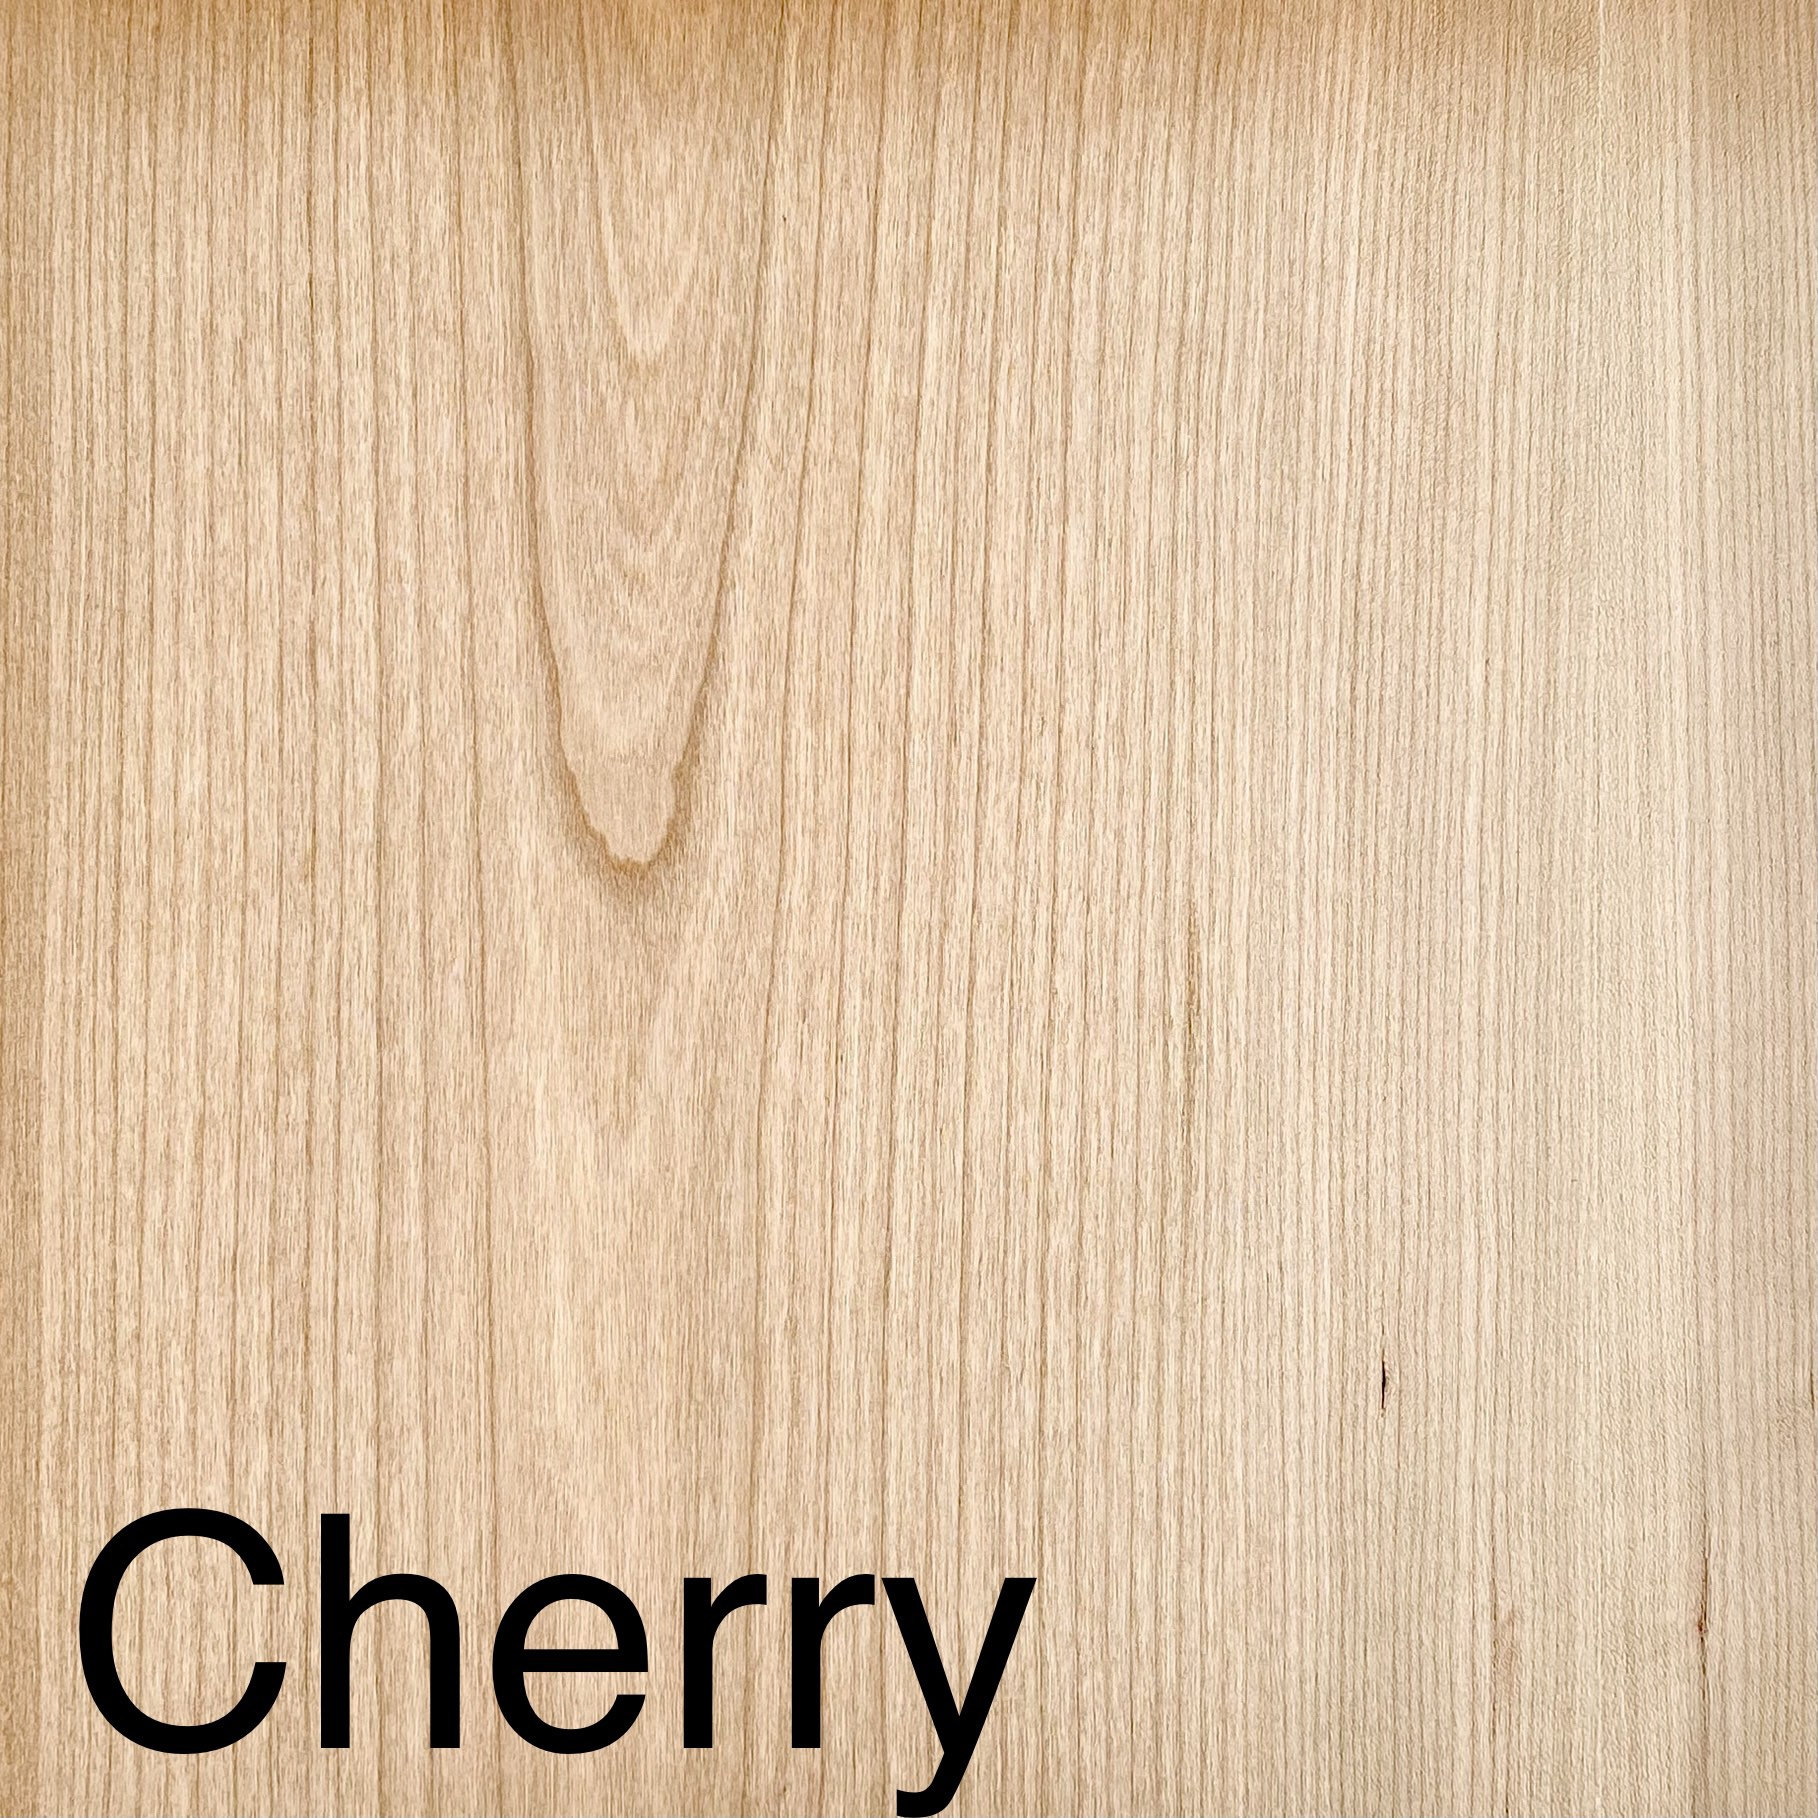 Cricut Natural Wood Veneers Bundle, Maple and Cherry, 12x12 for Crafts Mini  Doll House Building Models School Art Ornament Projects Engraving Painting